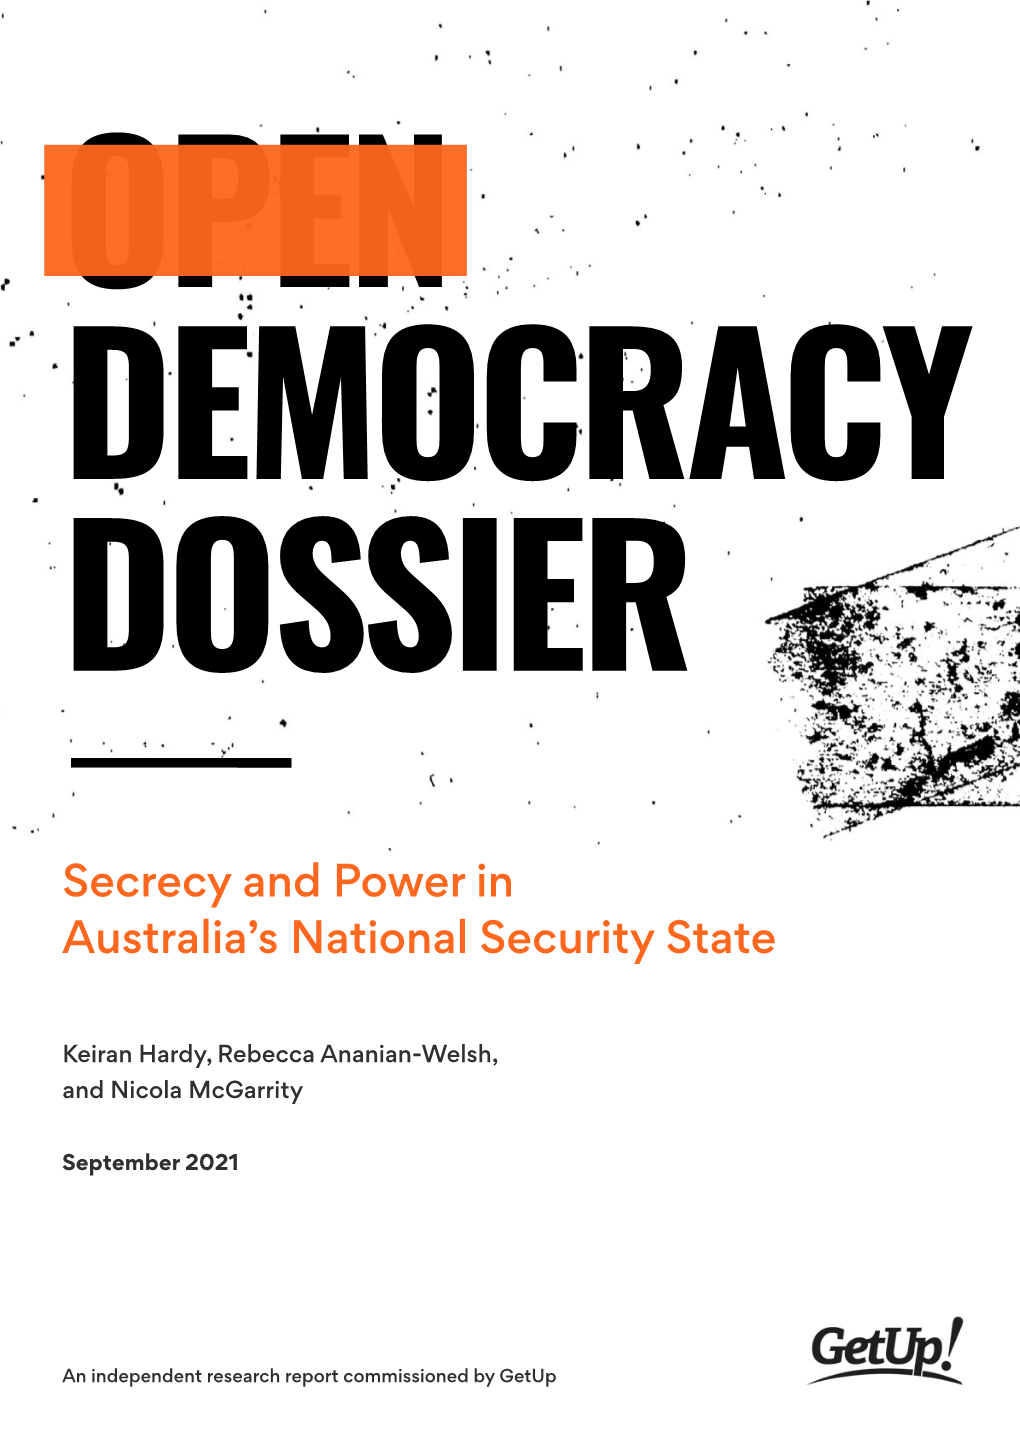 Secrecy and Power in Australia's National Security State